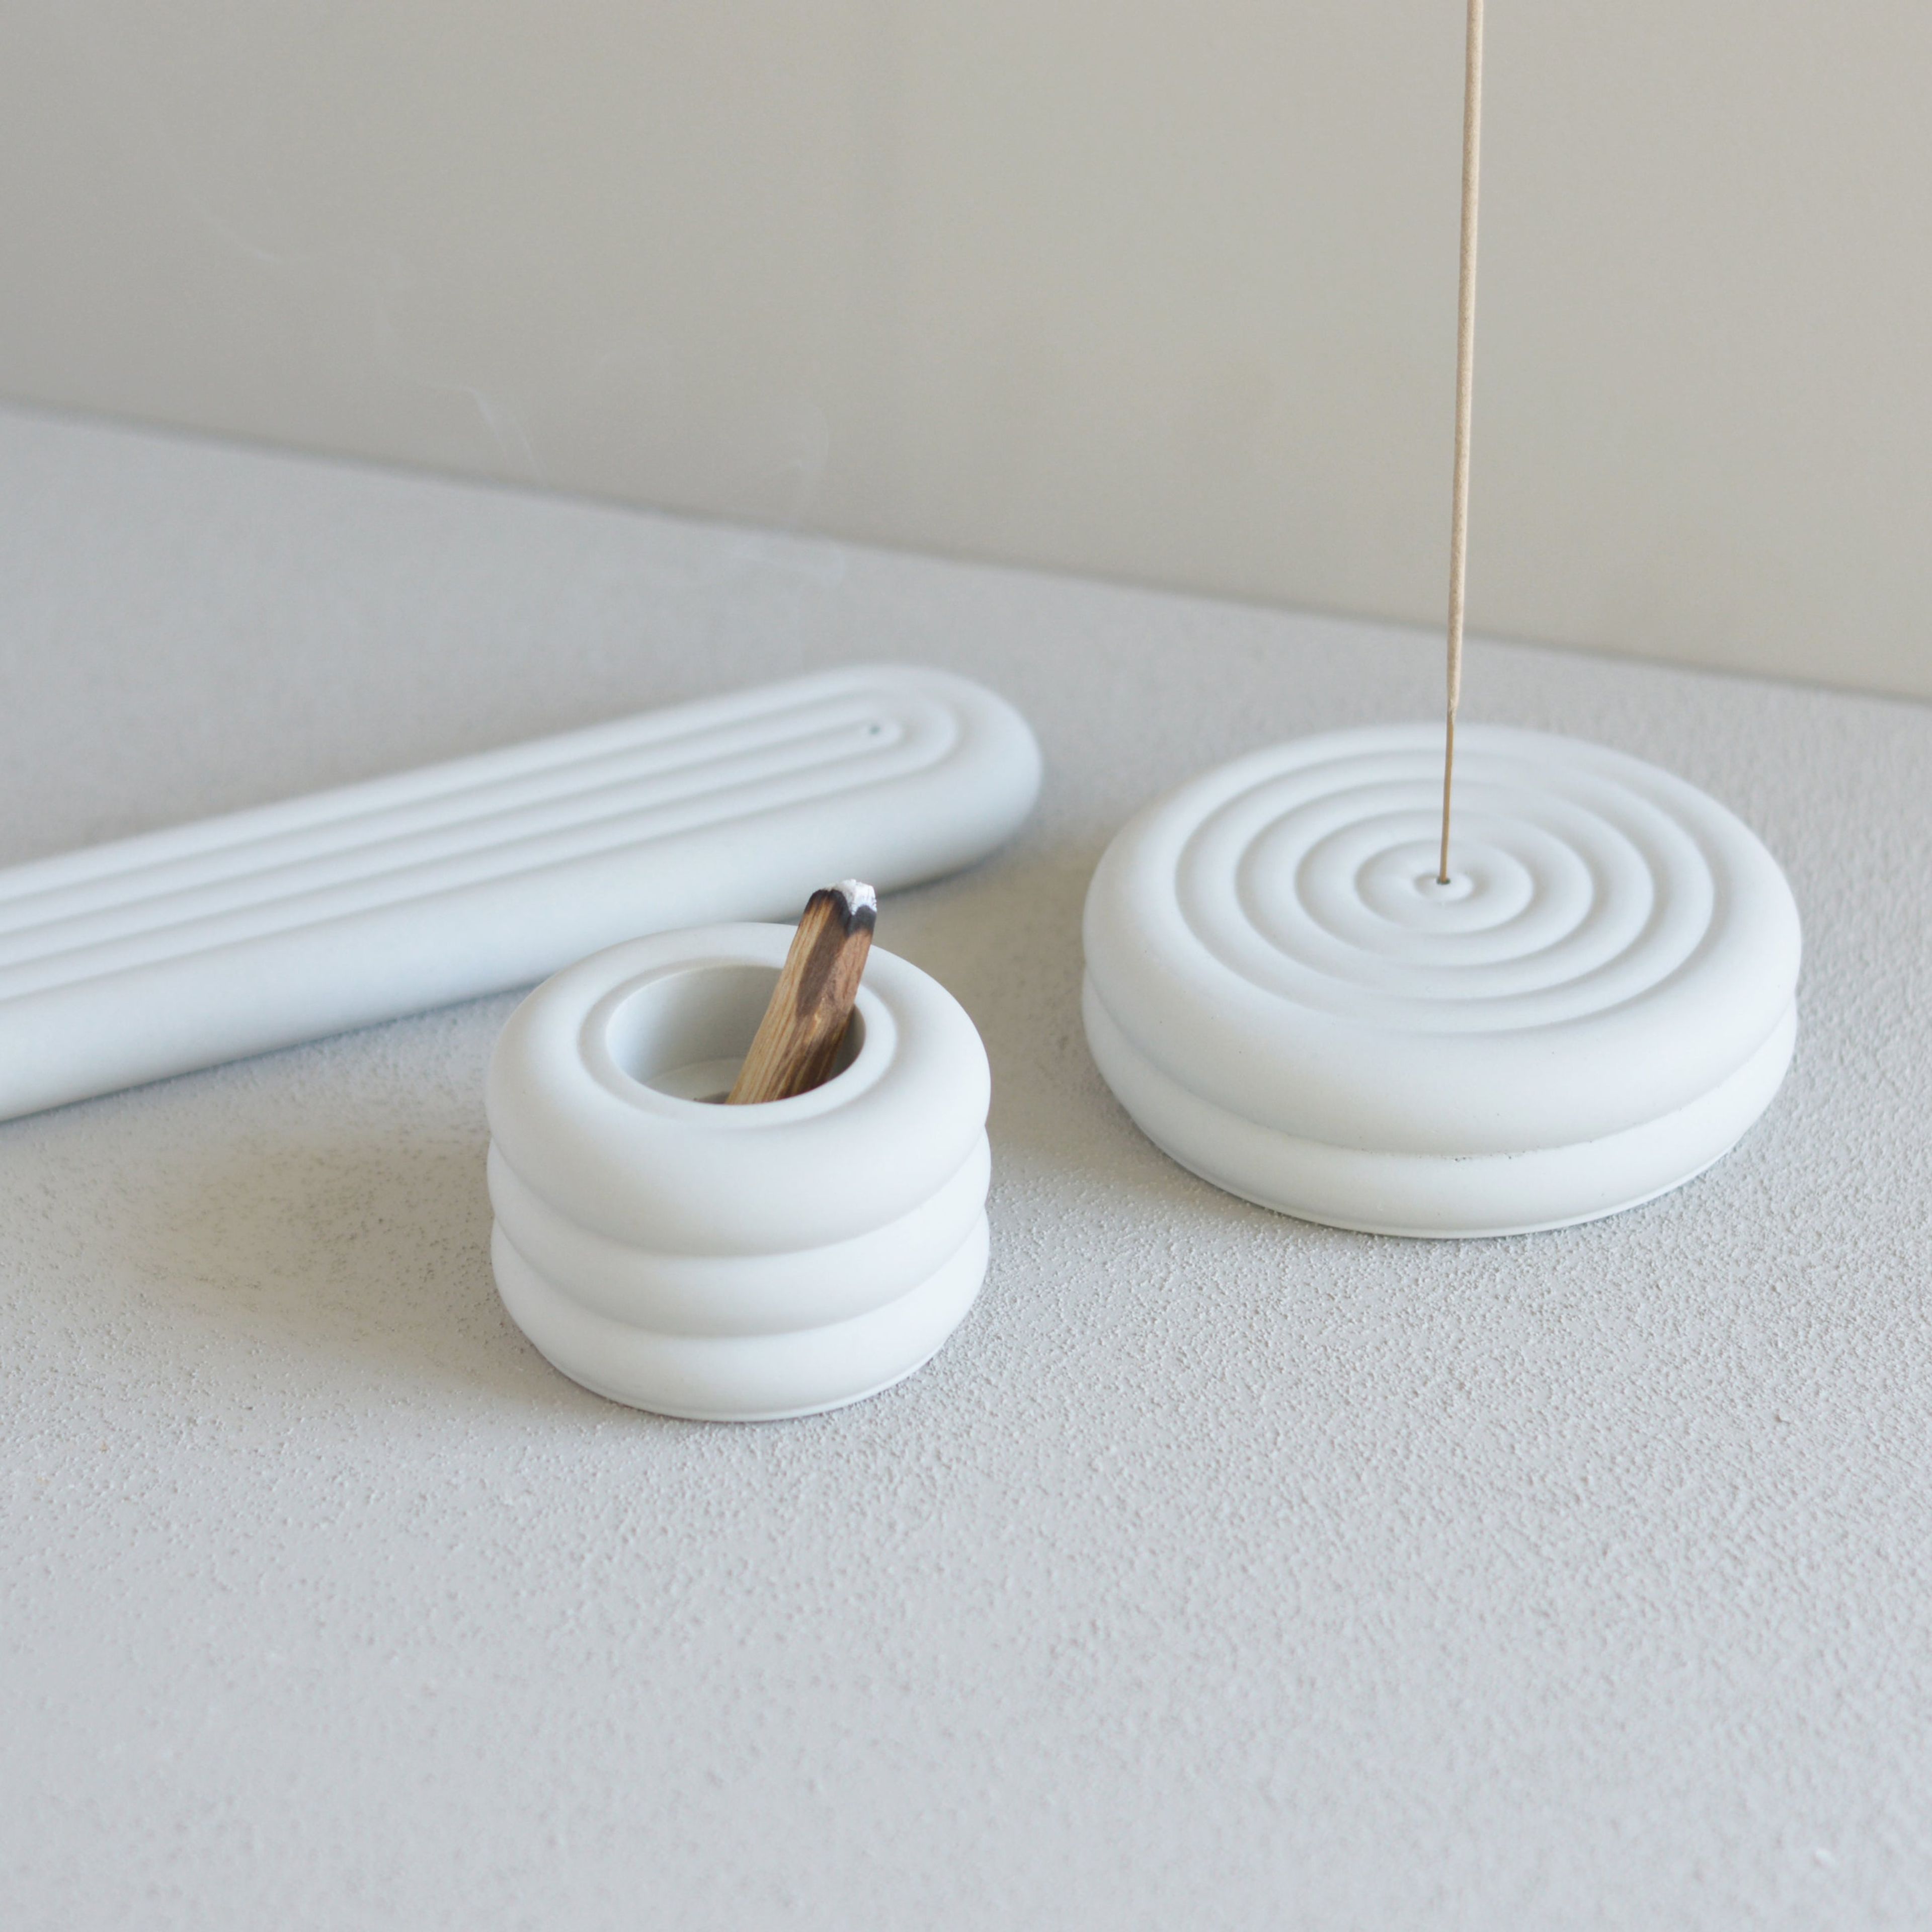 Poolside Round Upright Incense Burner : : SS21 Studio Collection : :